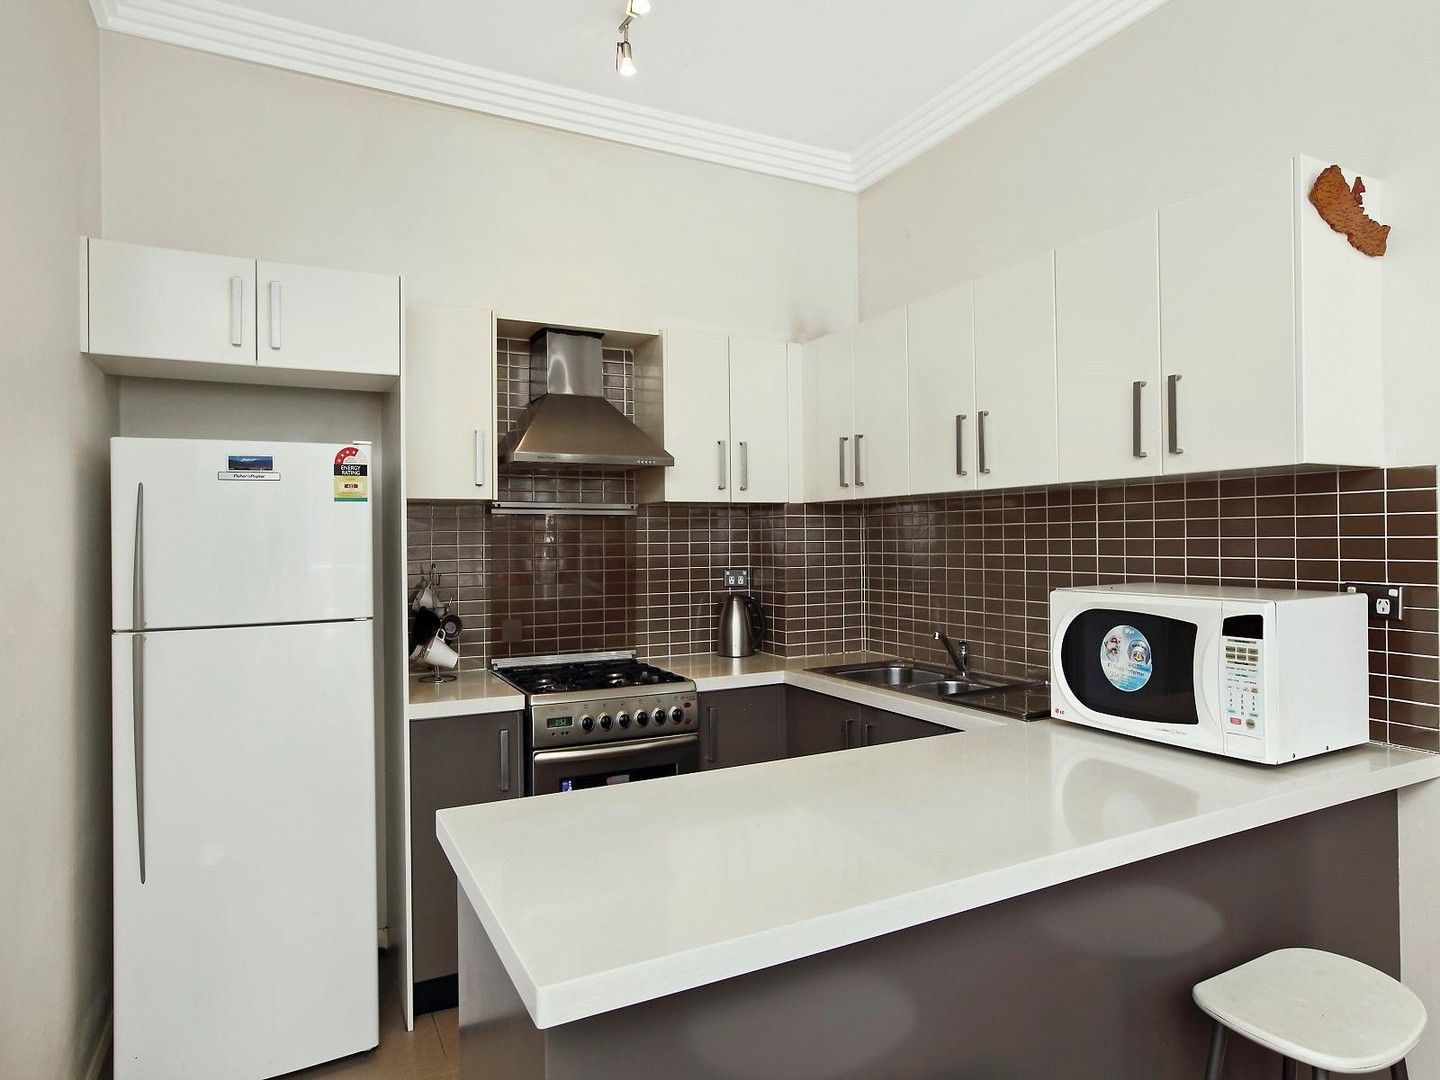 2 bedrooms Apartment / Unit / Flat in 54/14-18 College Crescent HORNSBY NSW, 2077